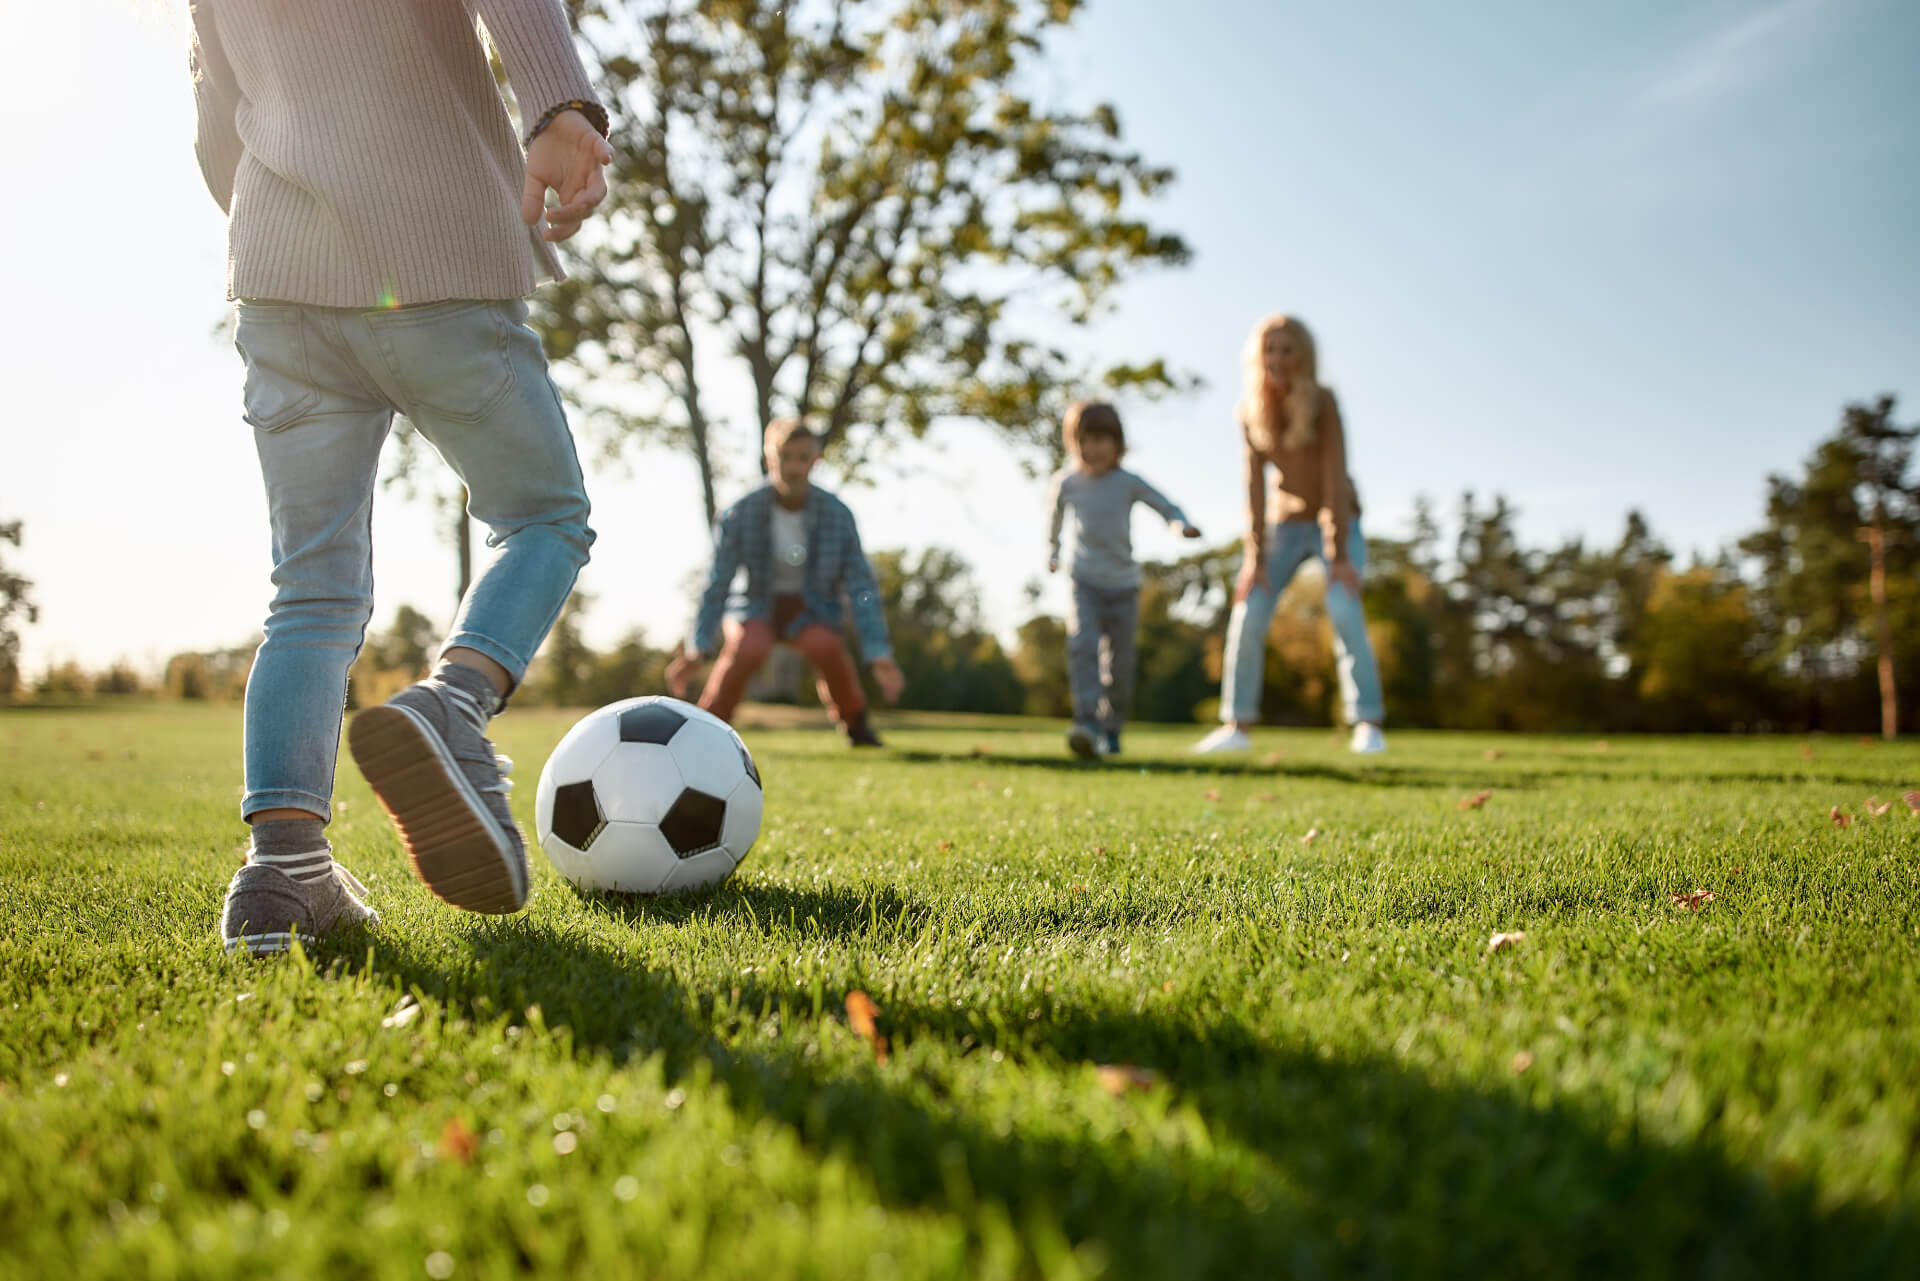 A family plays soccer in a park